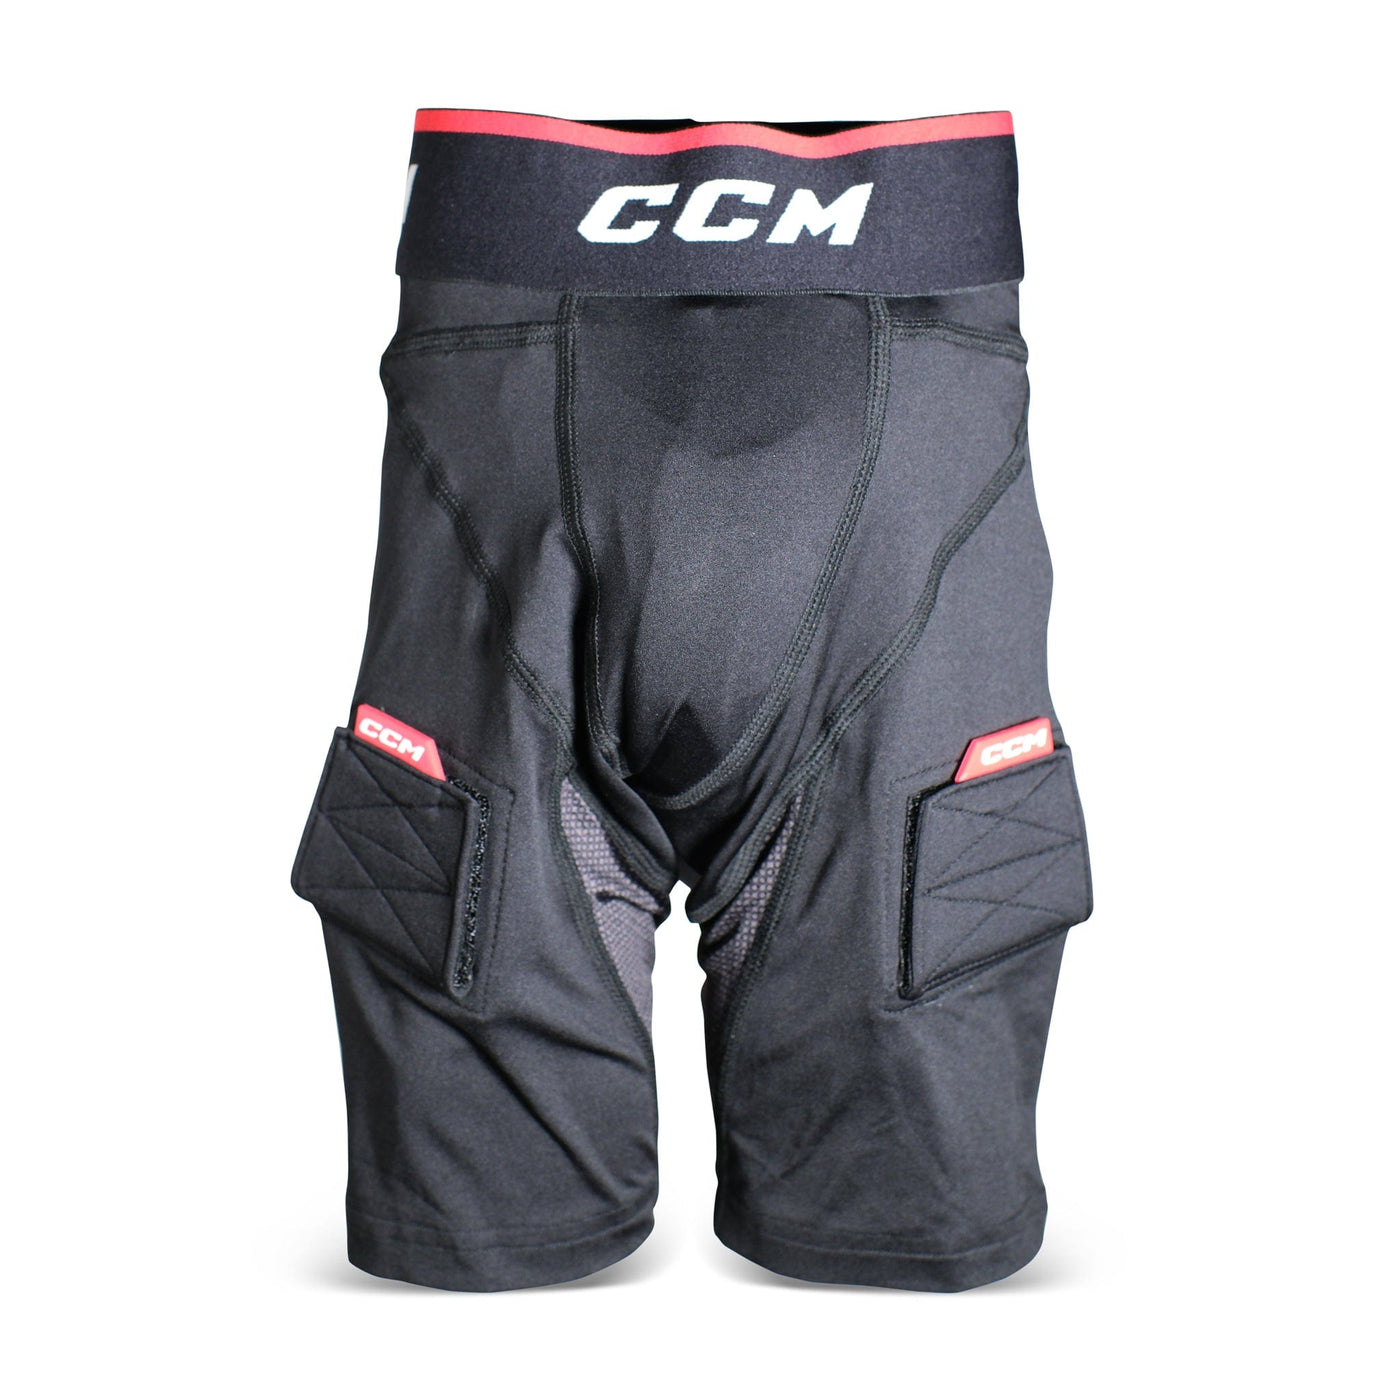 CCM Junior Compression Jock Shorts w/ Tabs - The Hockey Shop Source For Sports